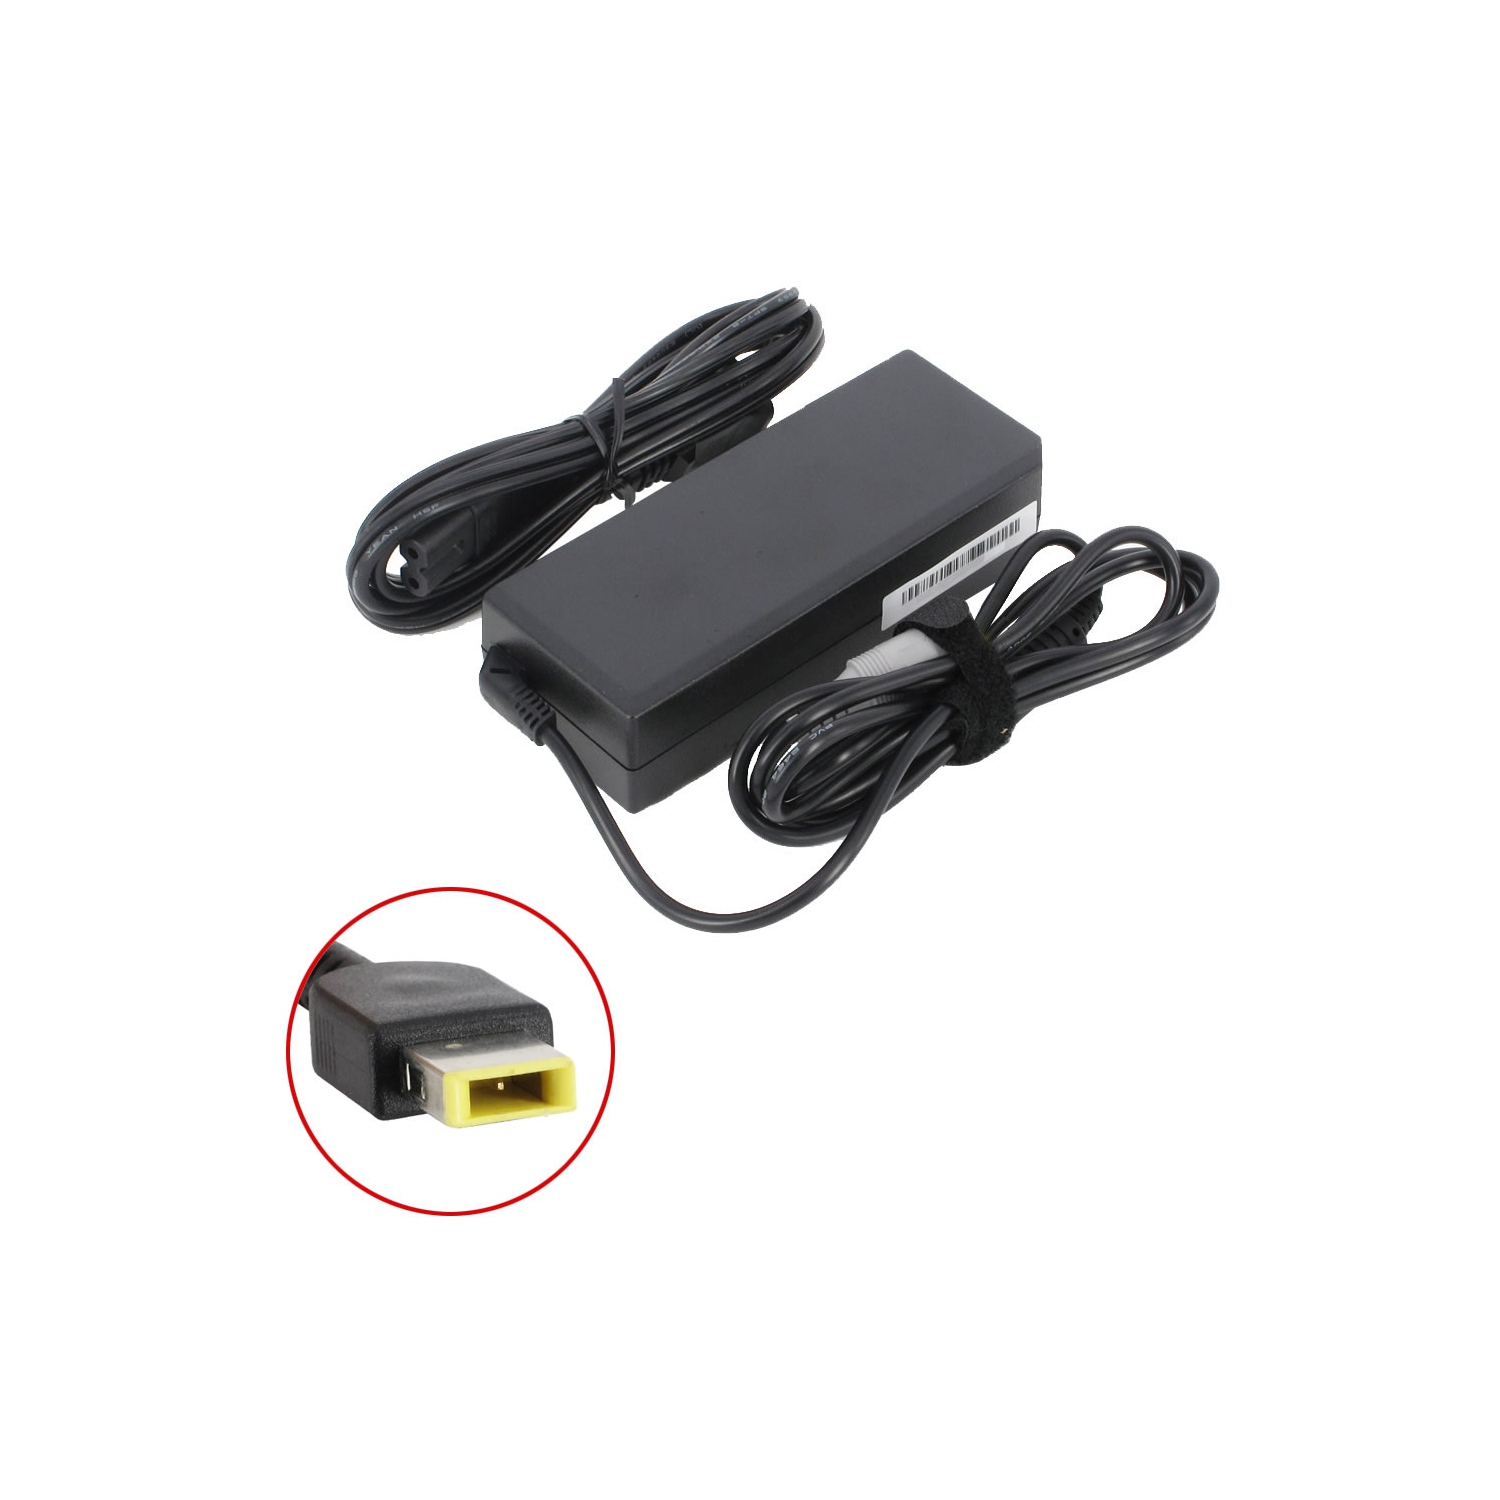 Brand New Laptop AC Adapter for Lenovo Yoga 500 14ISK, 0B47045, 36200246, ADLX45NCC3A, ADLX65NDC3A, 36200124